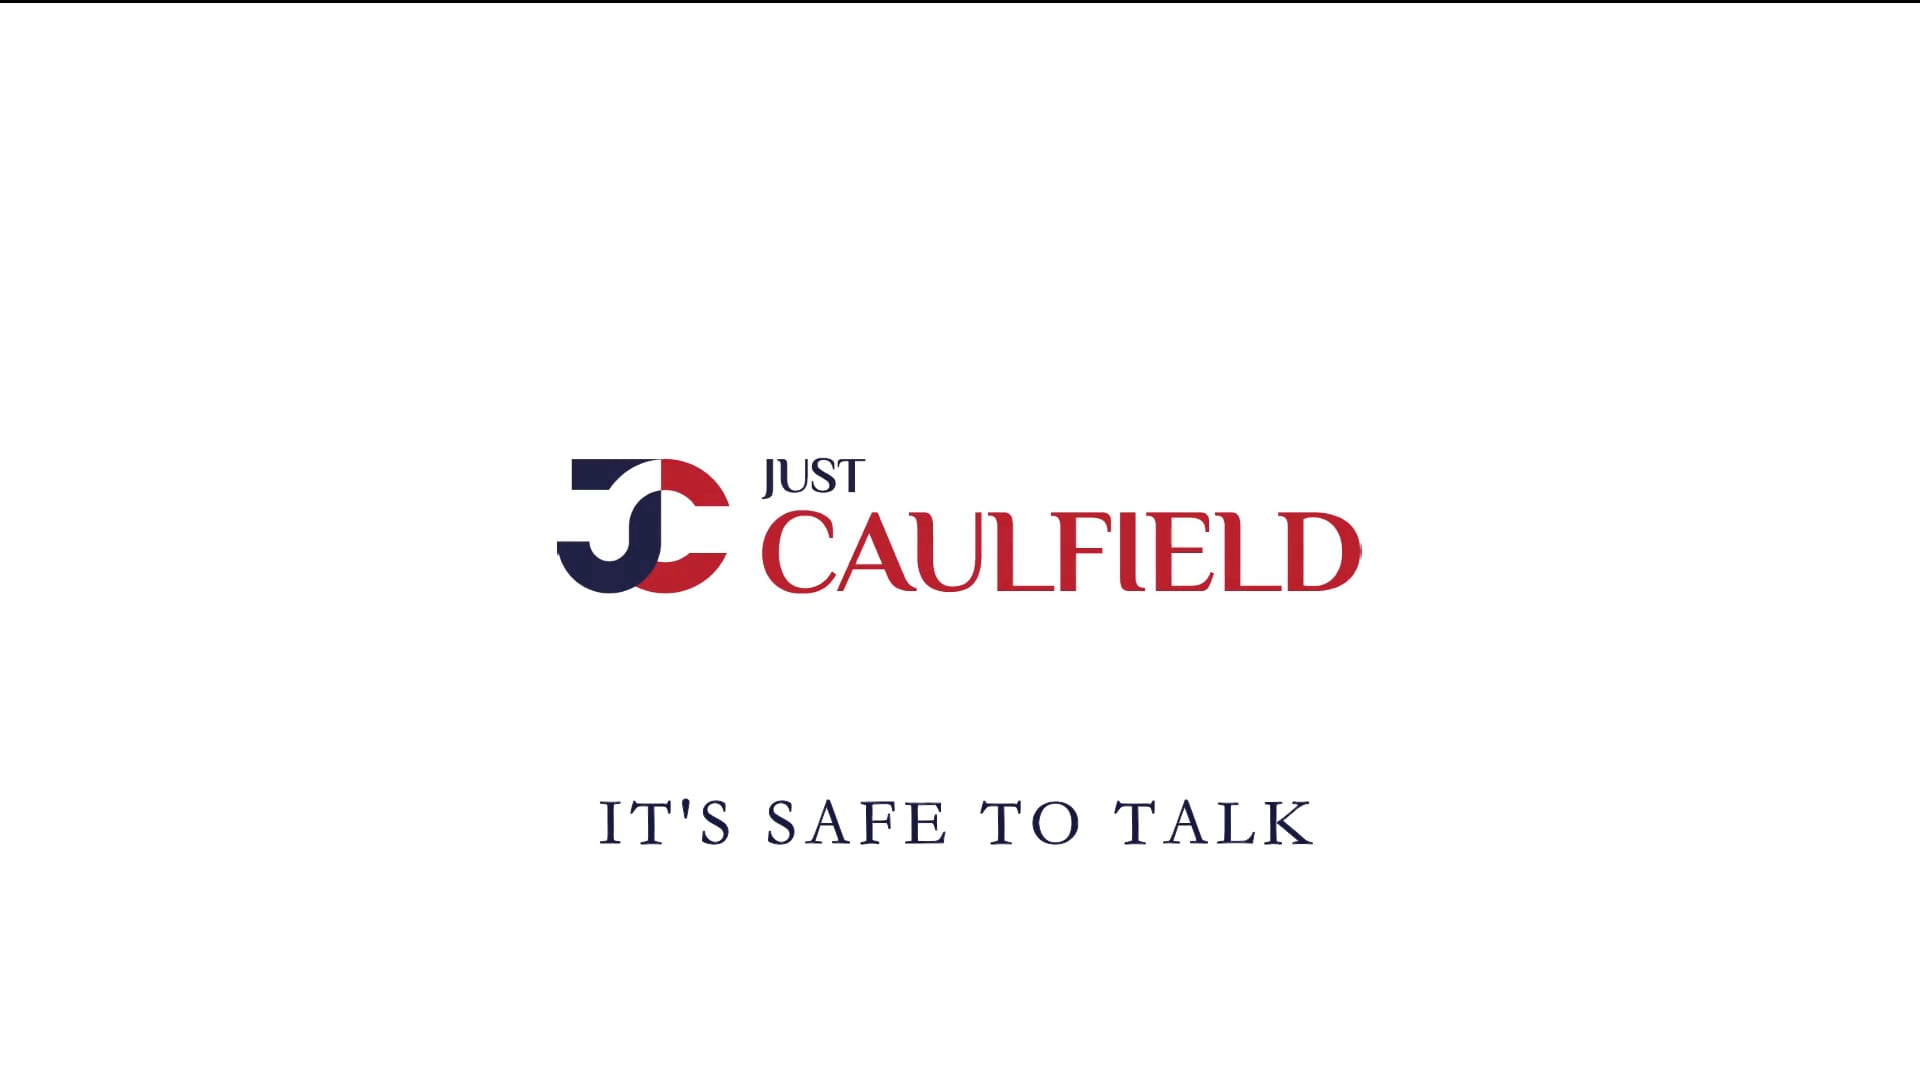 ITS SAFE TO TALK